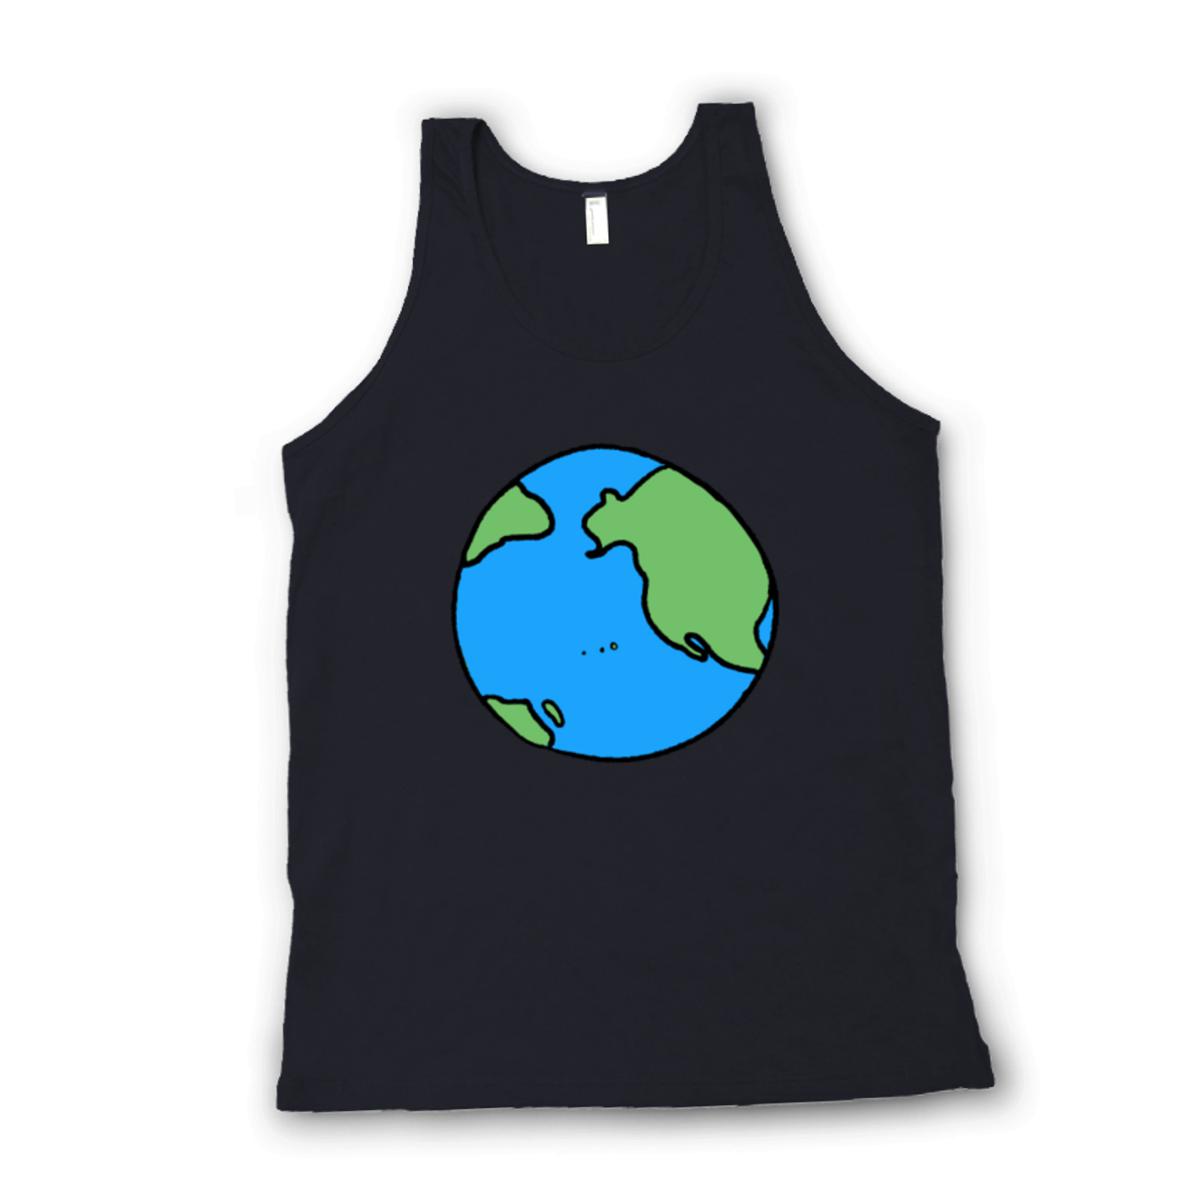 Earth Unisex Tank Top Extra Small black